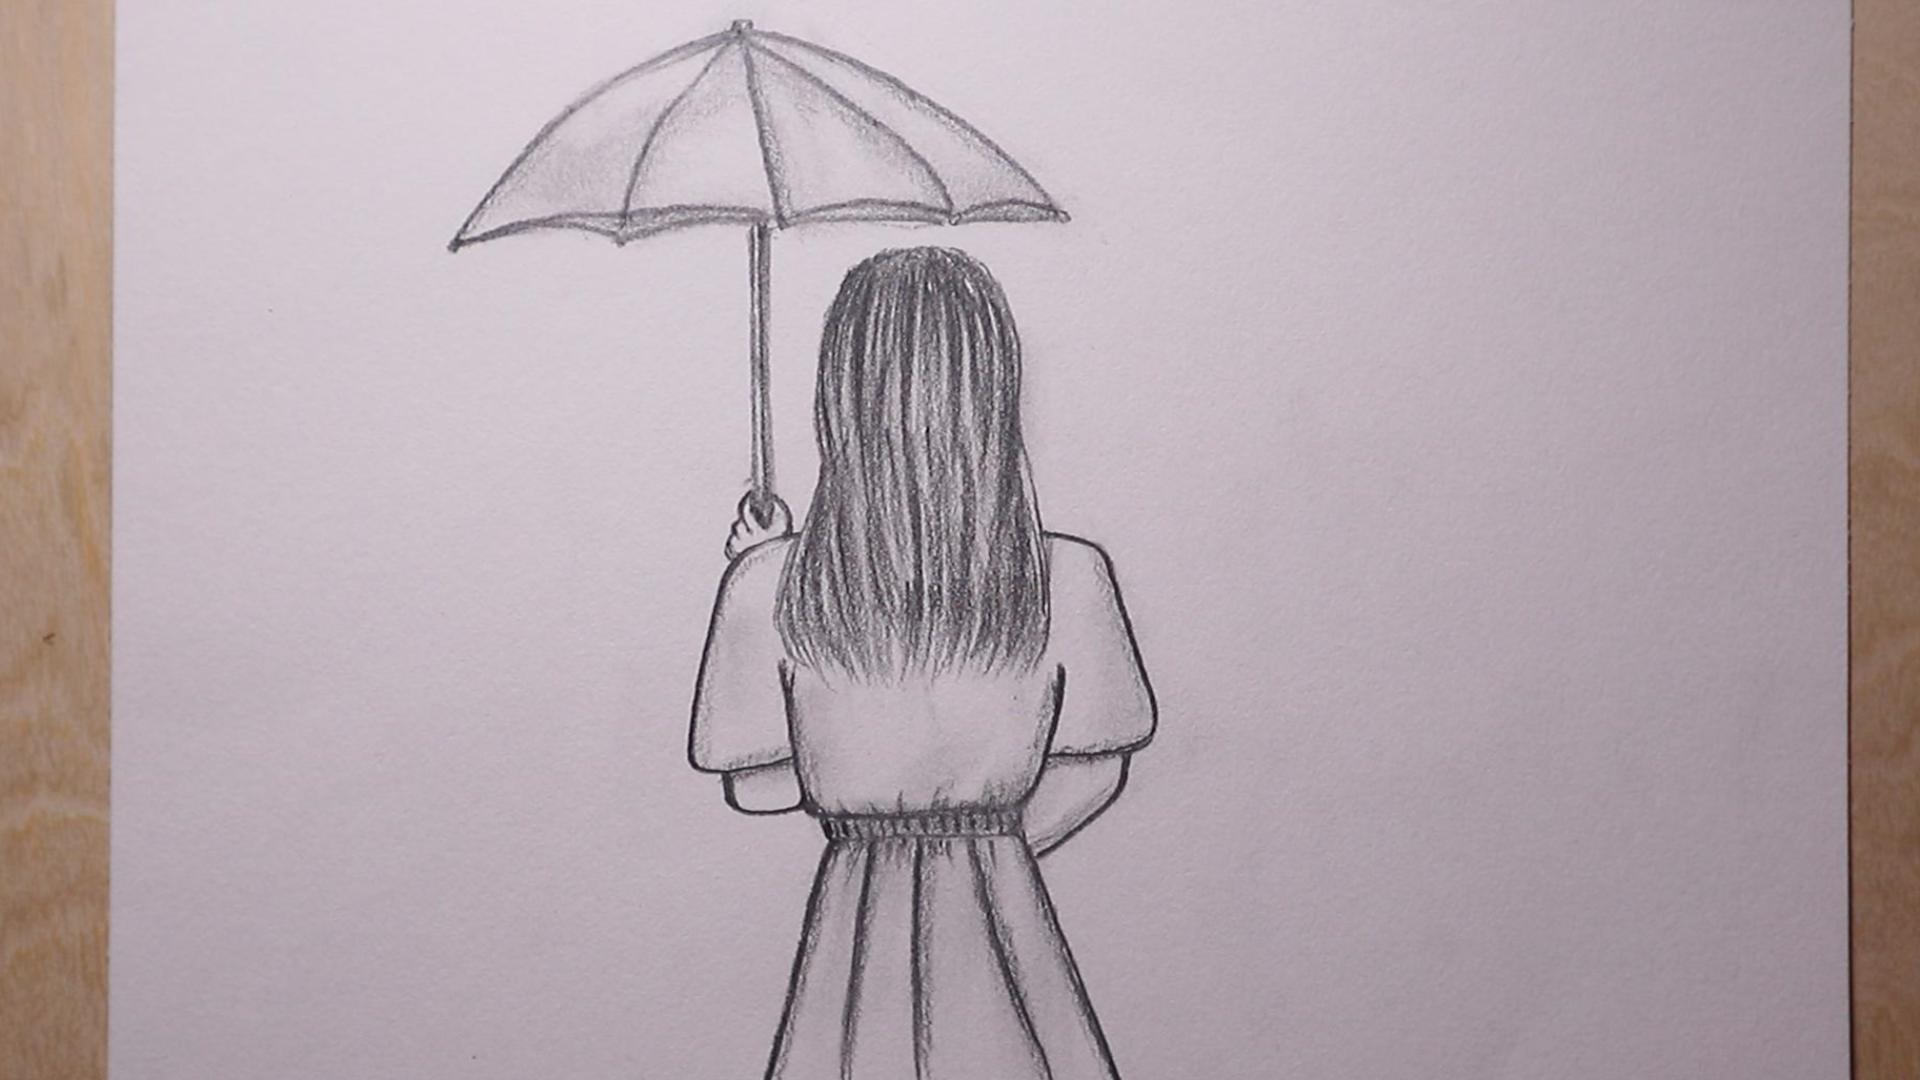 How To Draw A Girl With An Umbrella